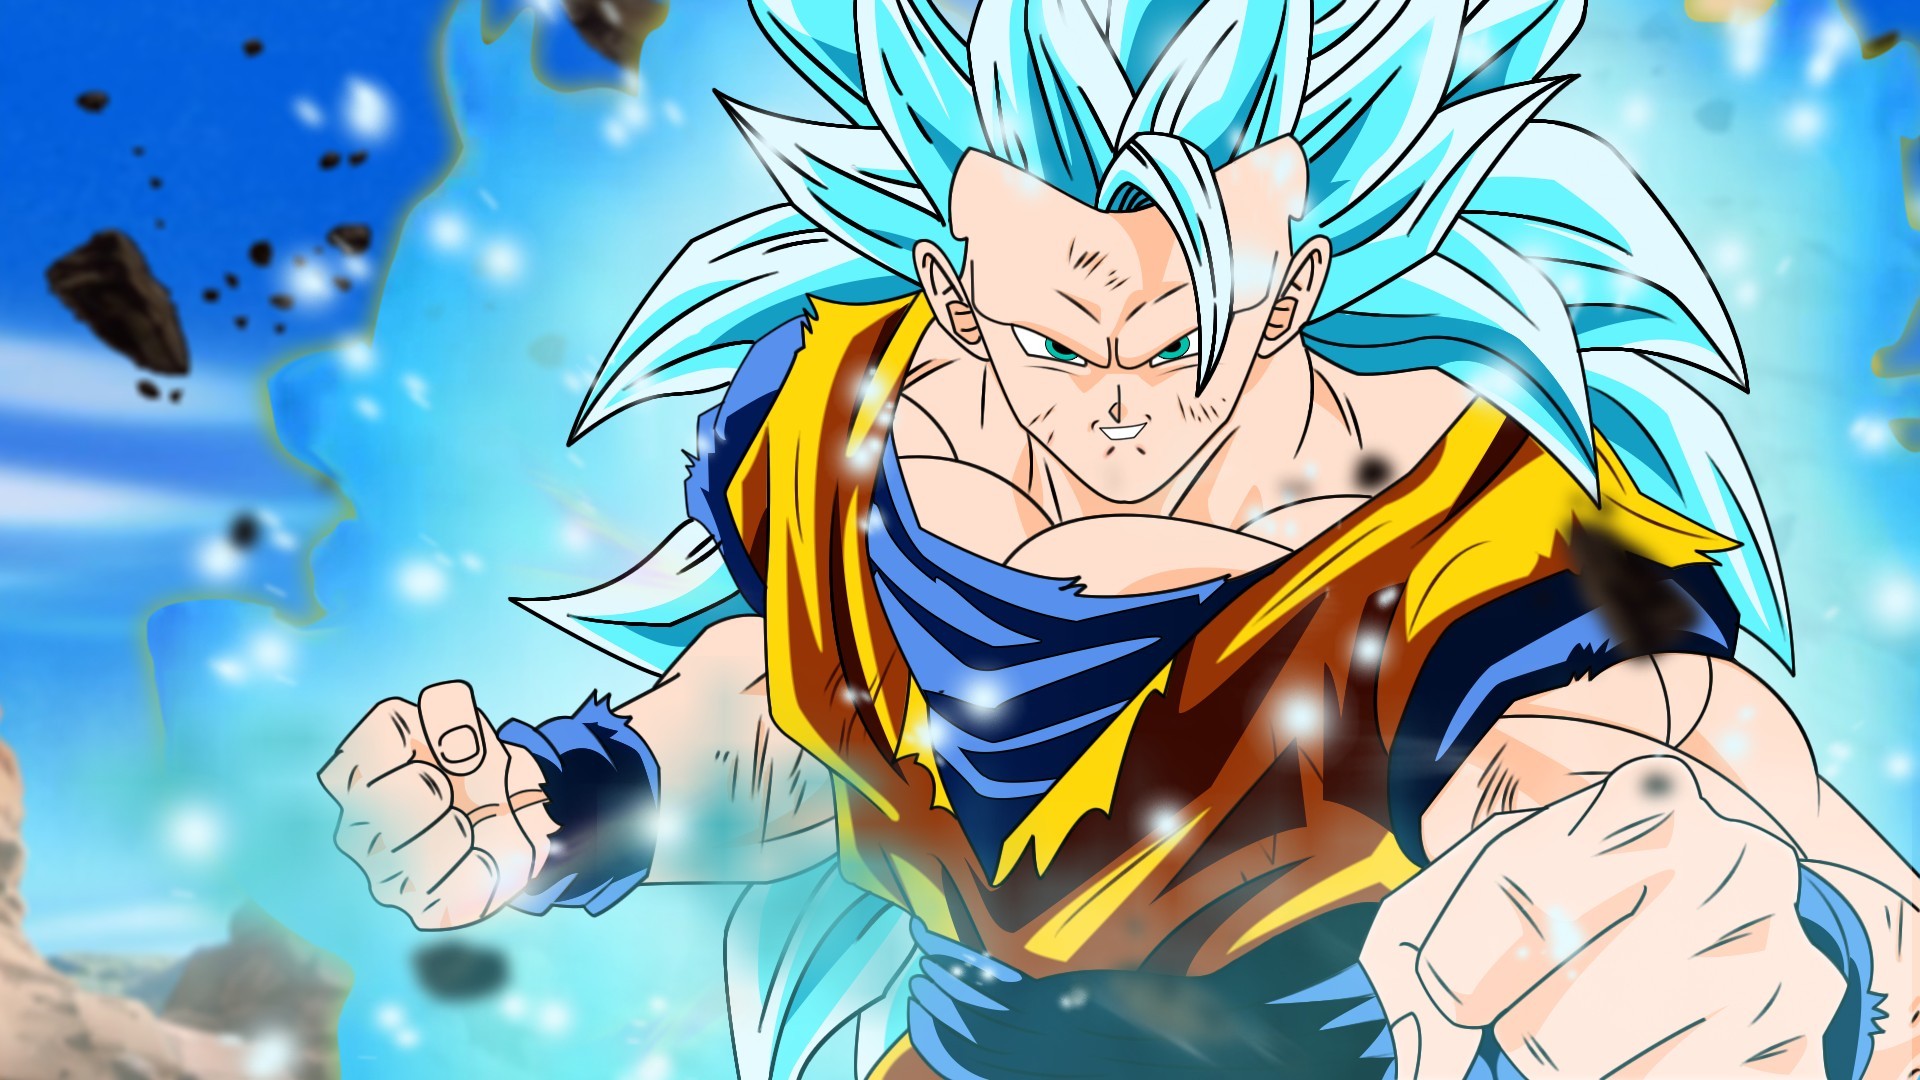 Goku SSJ3 Desktop Wallpaper with image resolution 1920x1080 pixel. You can use this wallpaper as background for your desktop Computer Screensavers, Android or iPhone smartphones